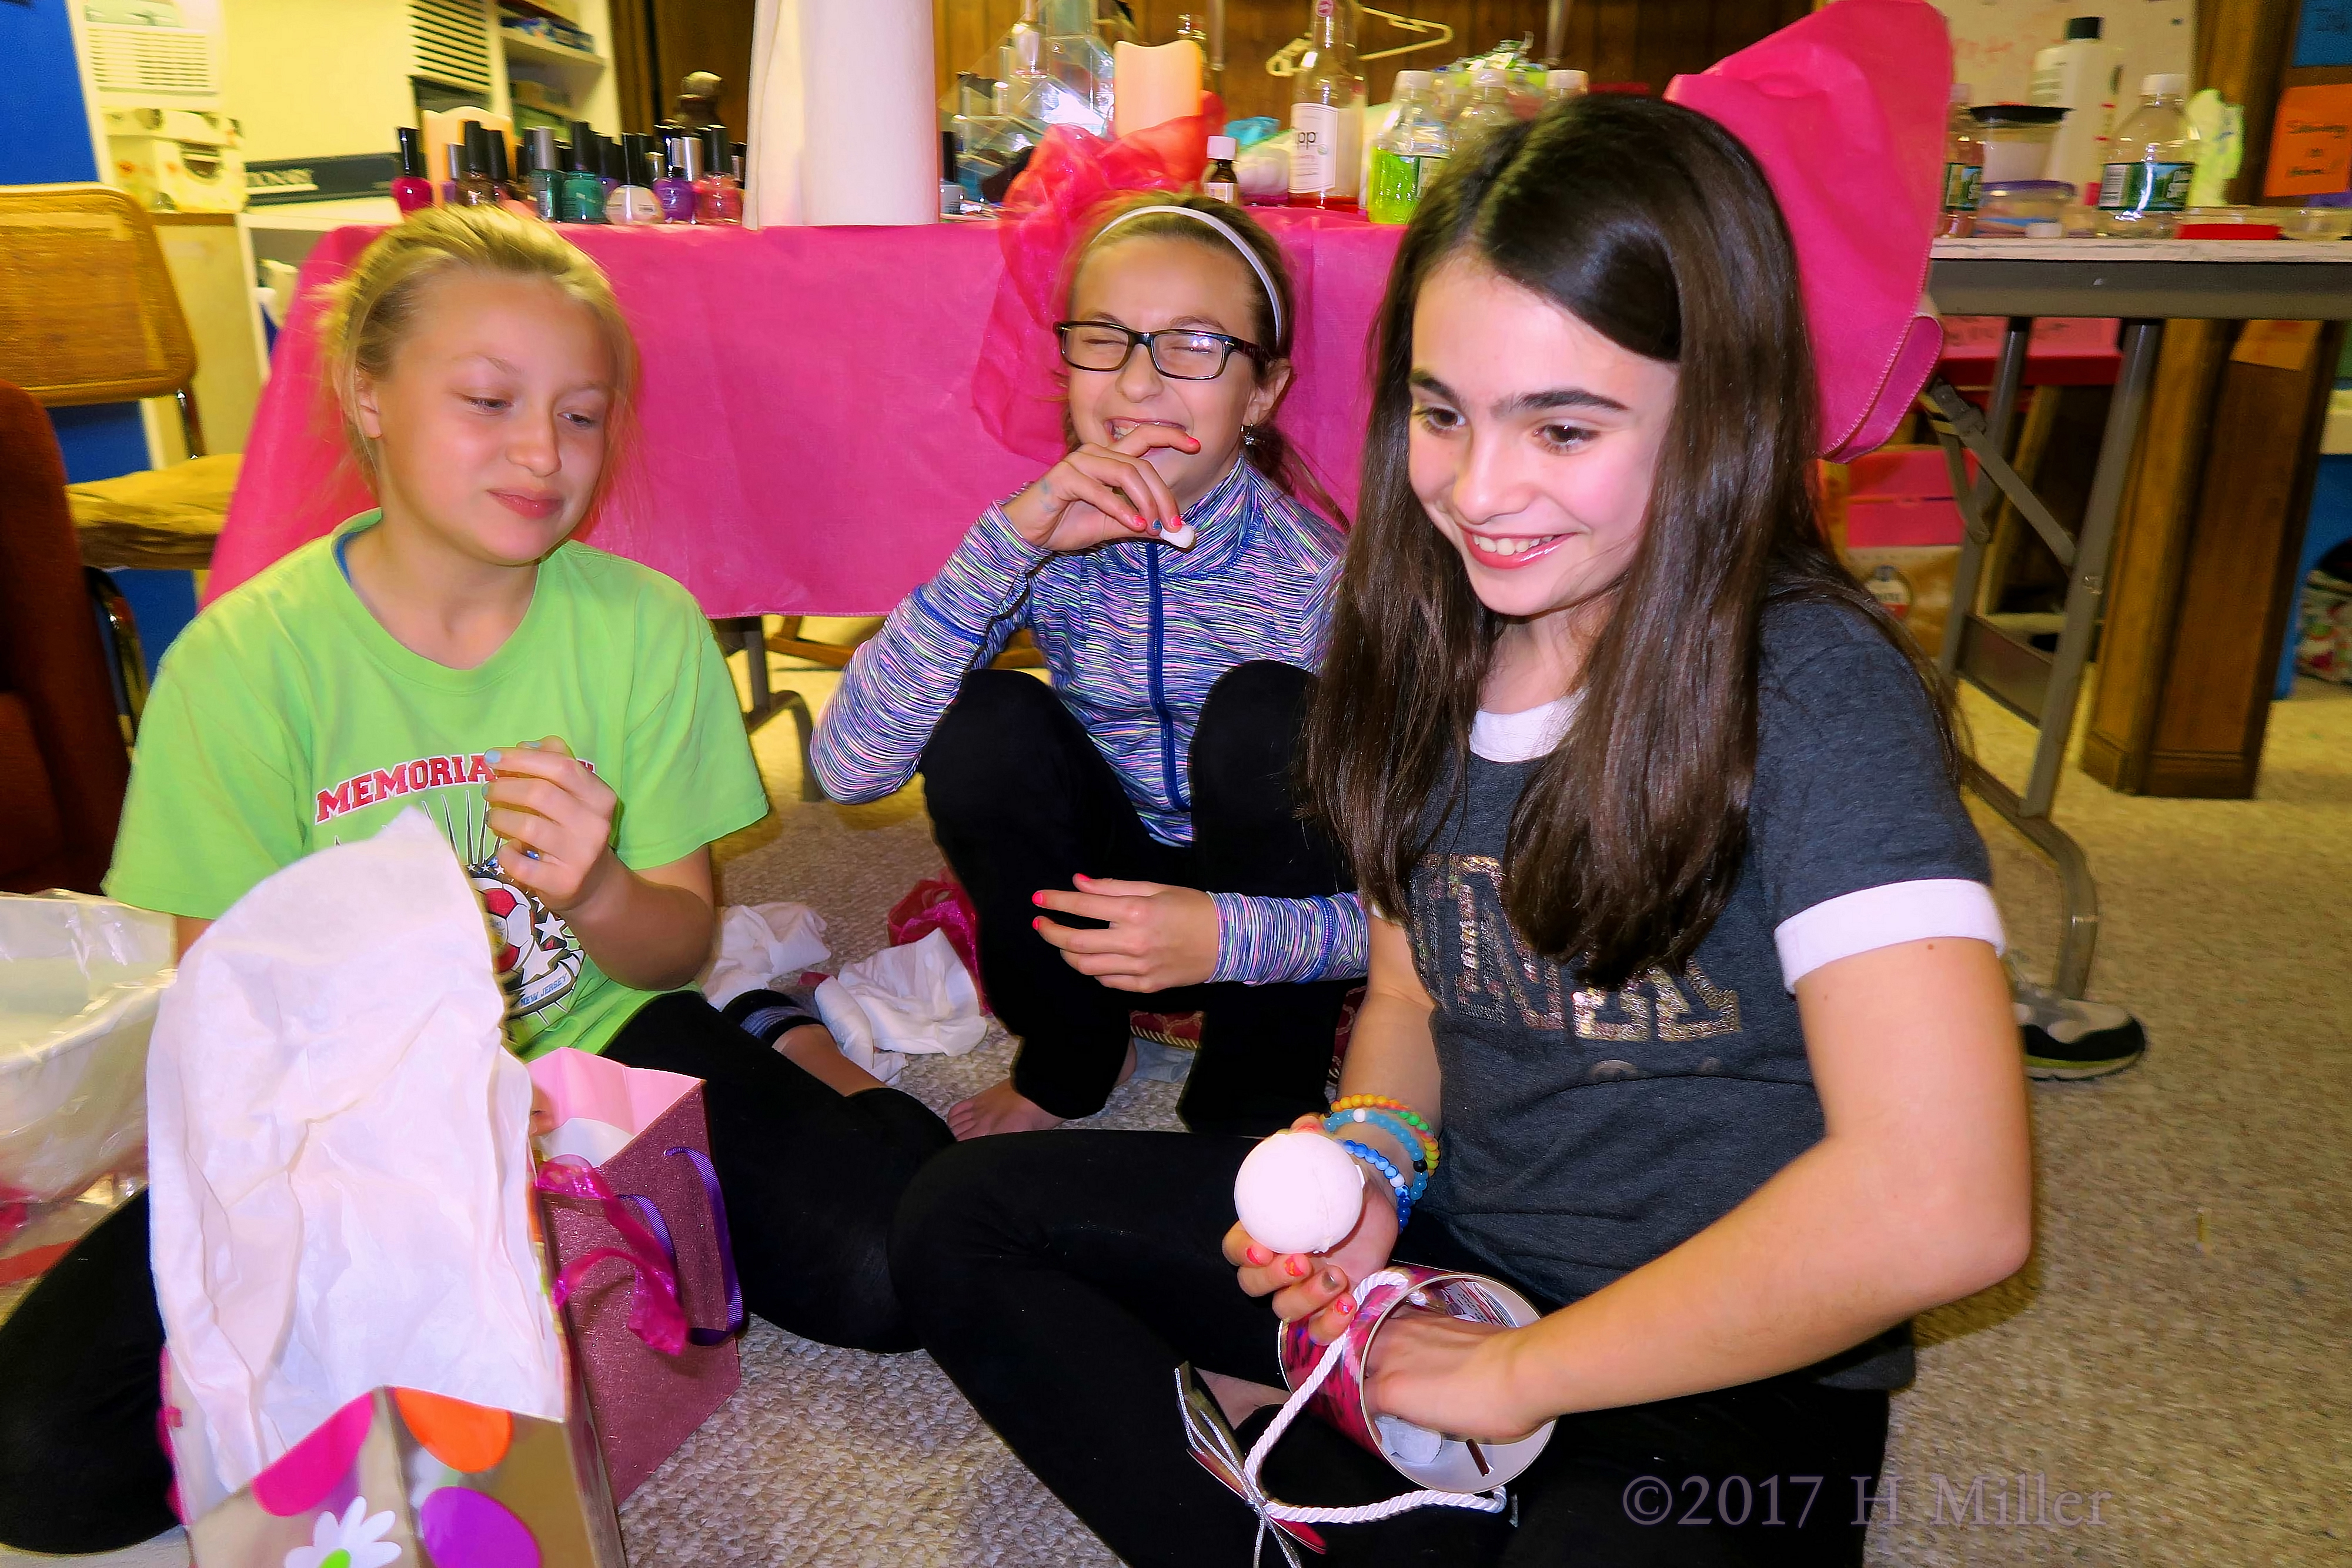 Smiling While Opening Her Present At The Kids Spa. 4